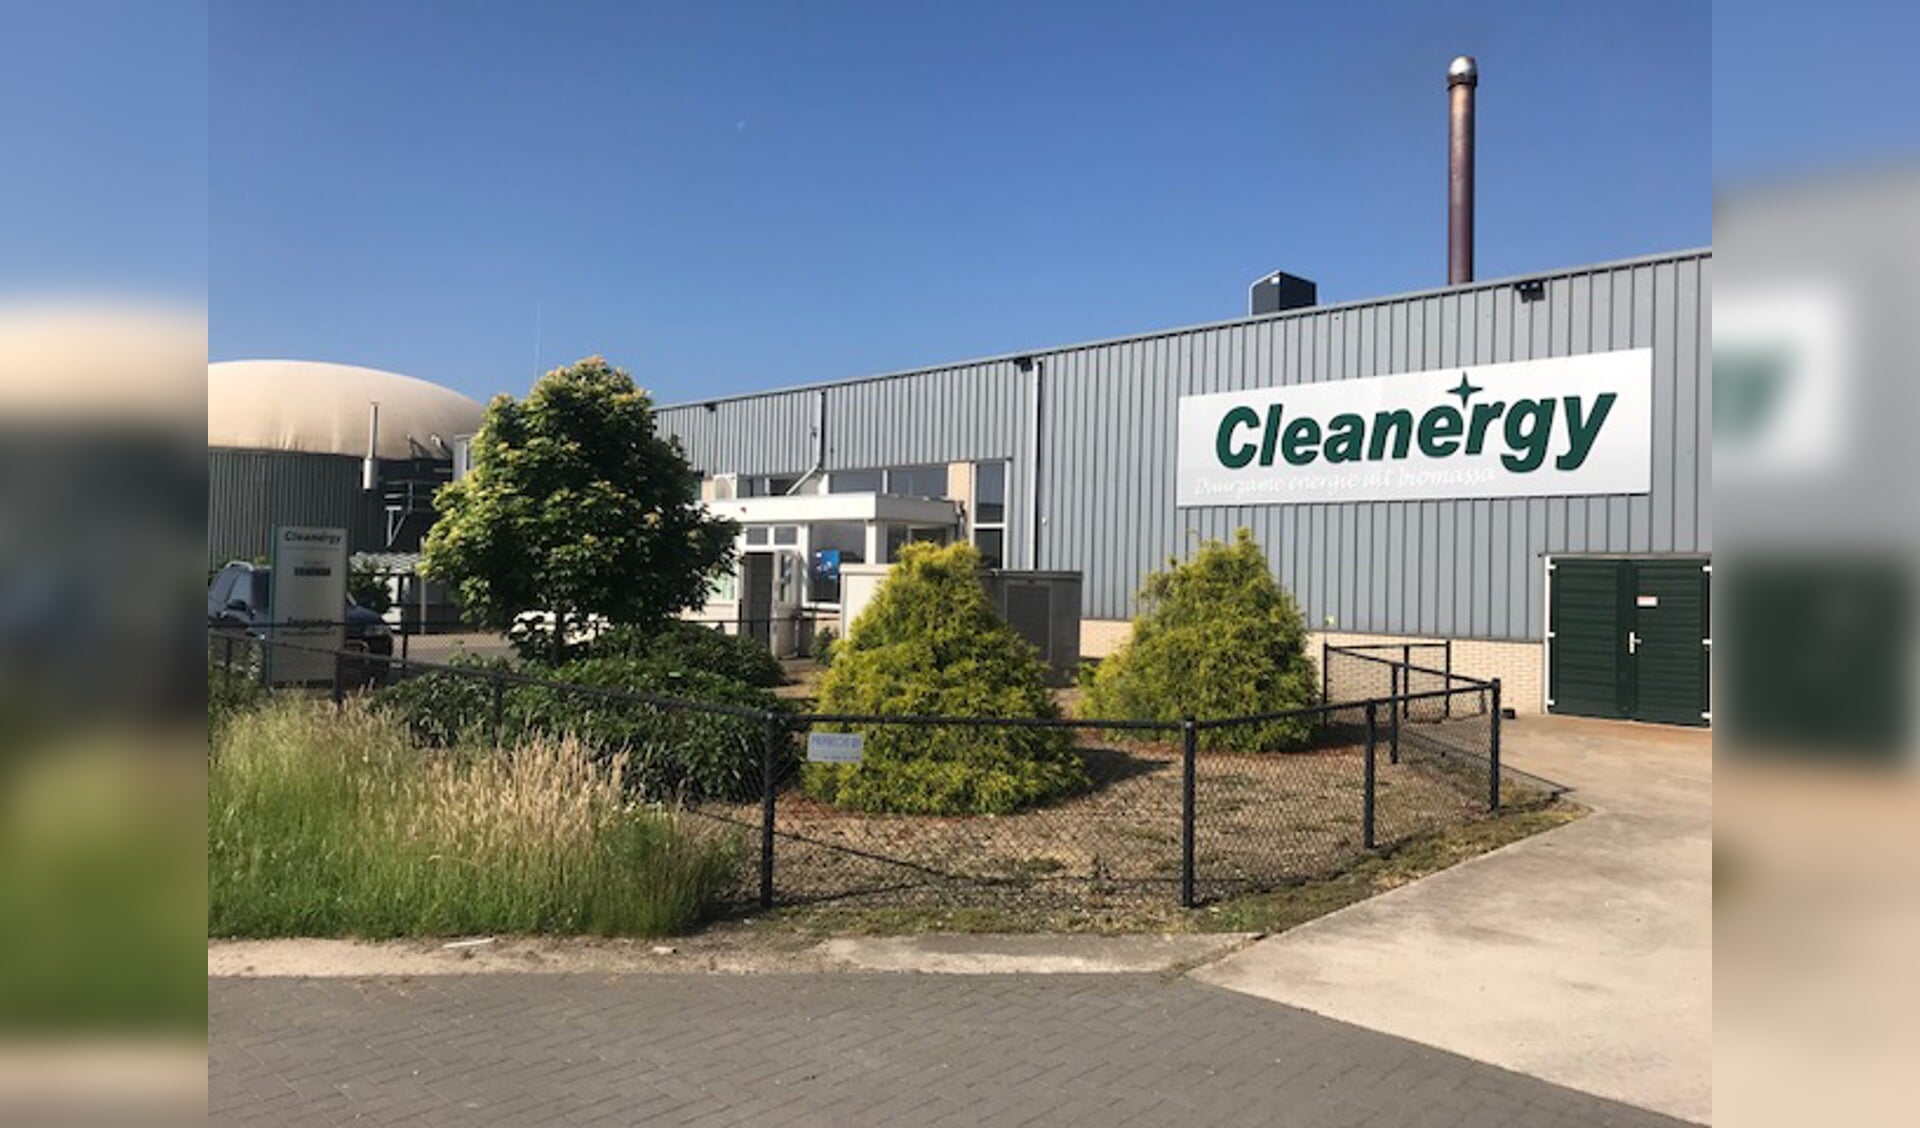 Cleanergy in Wanroij.